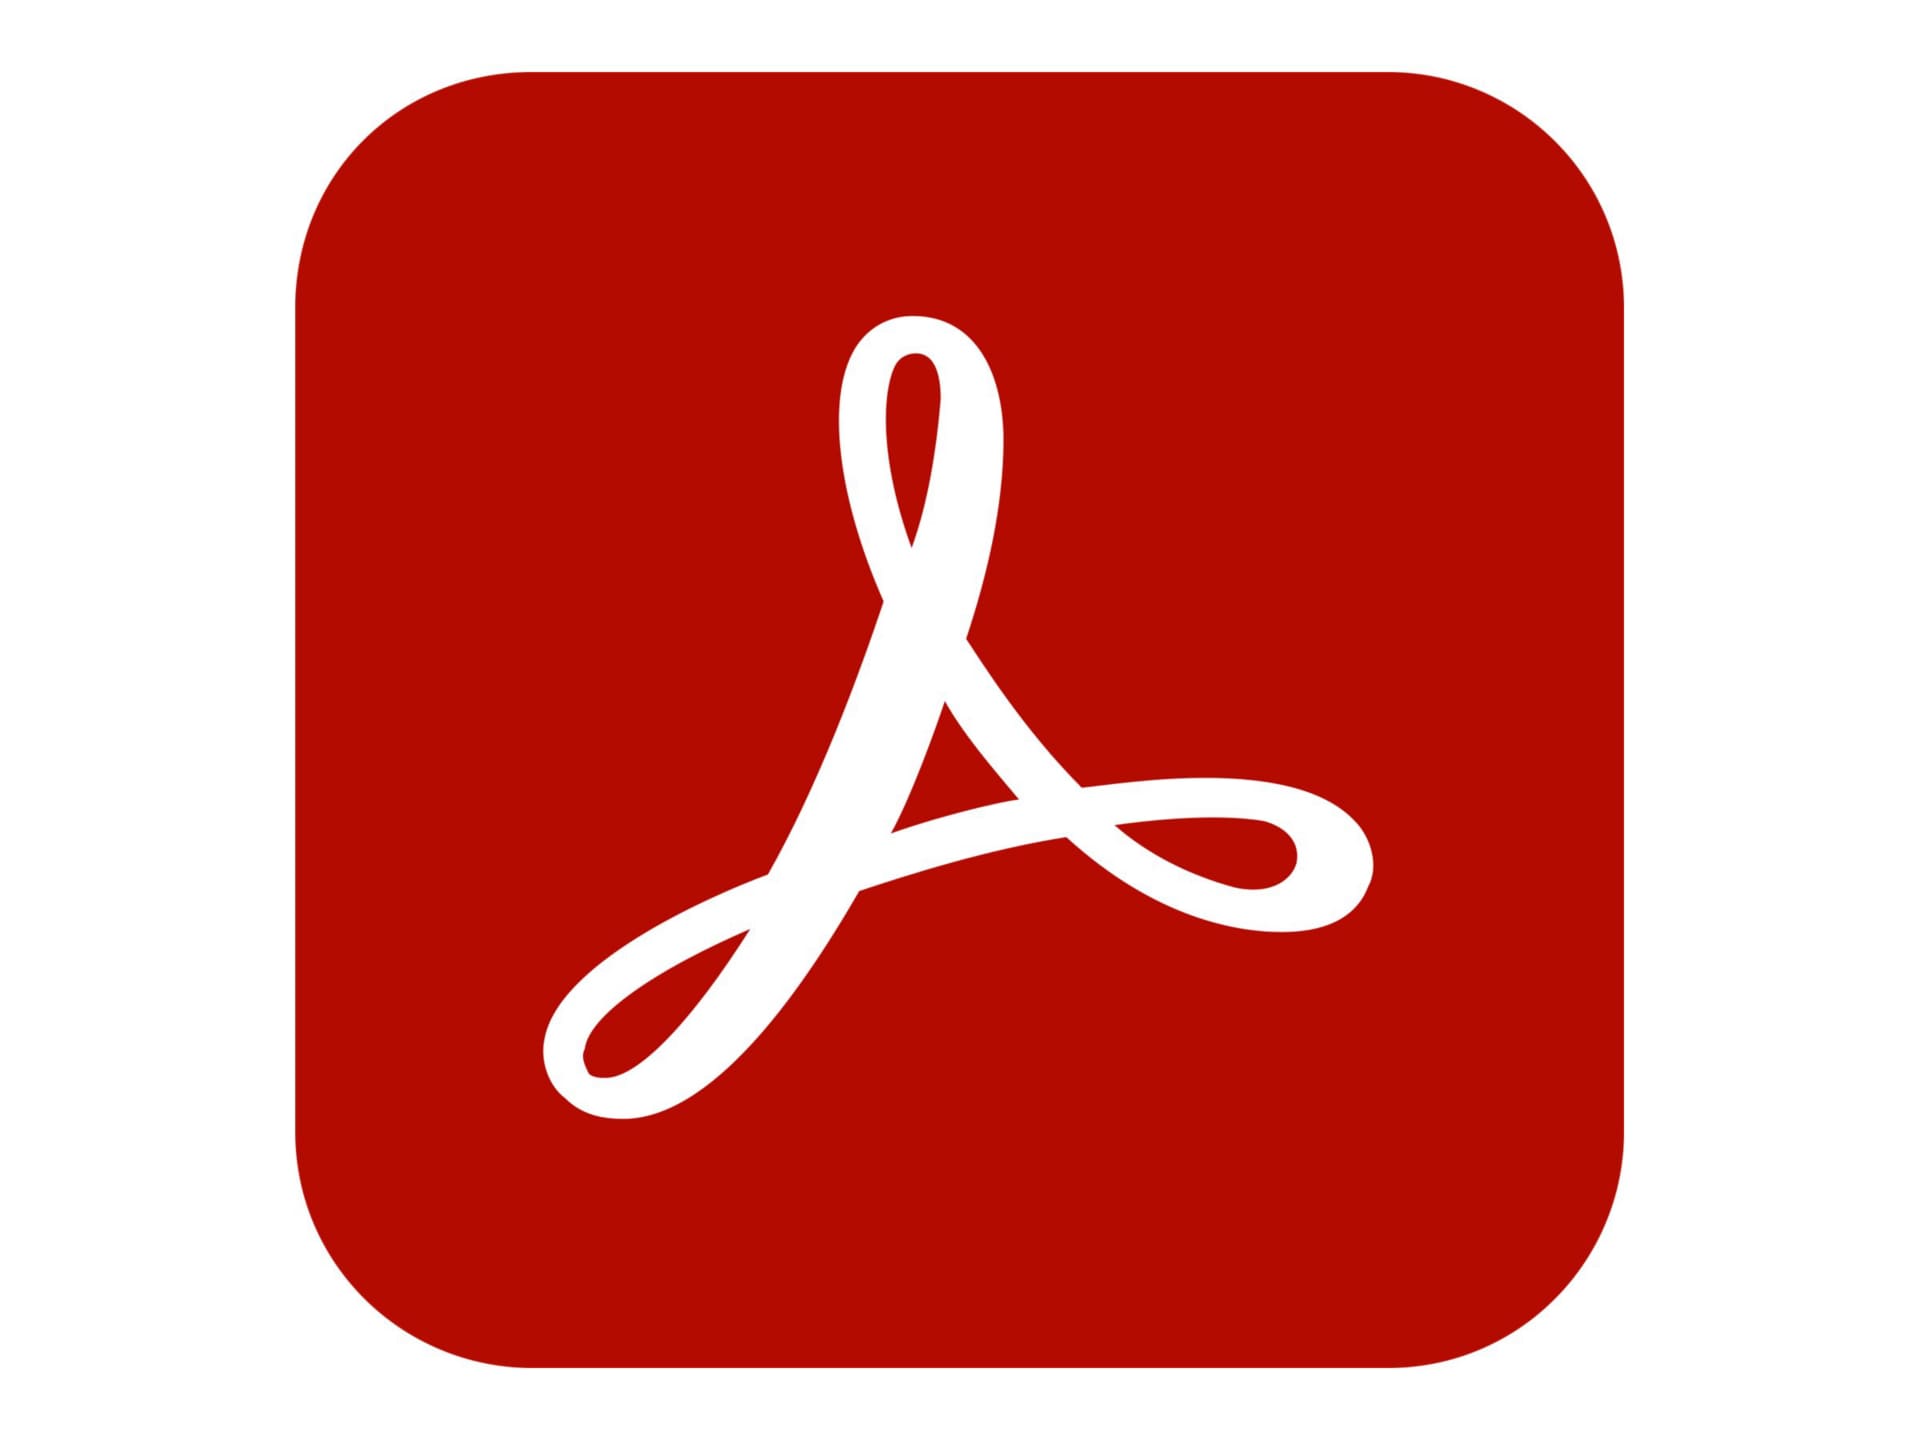 Adobe Acrobat Pro DC for teams - Subscription New (18 months) - 1 named user